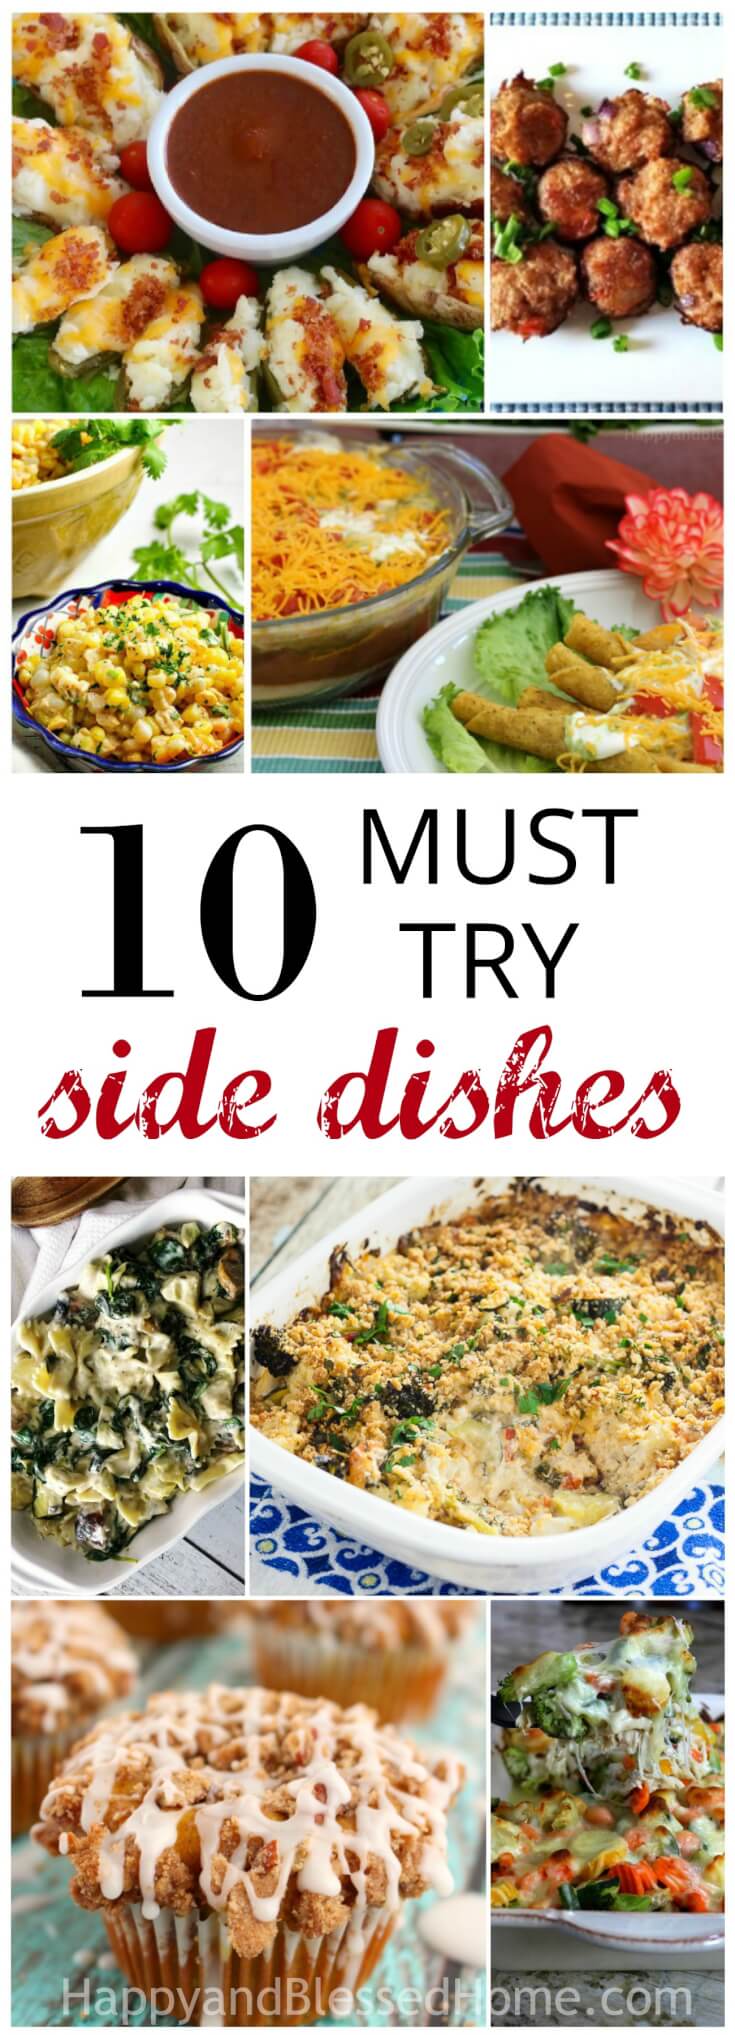 Don't miss 10 NEW Must Try Side Dishes perfectly for nearly any and every meal. Some with corn, other's with potatoes, and even more with meats and veggies!